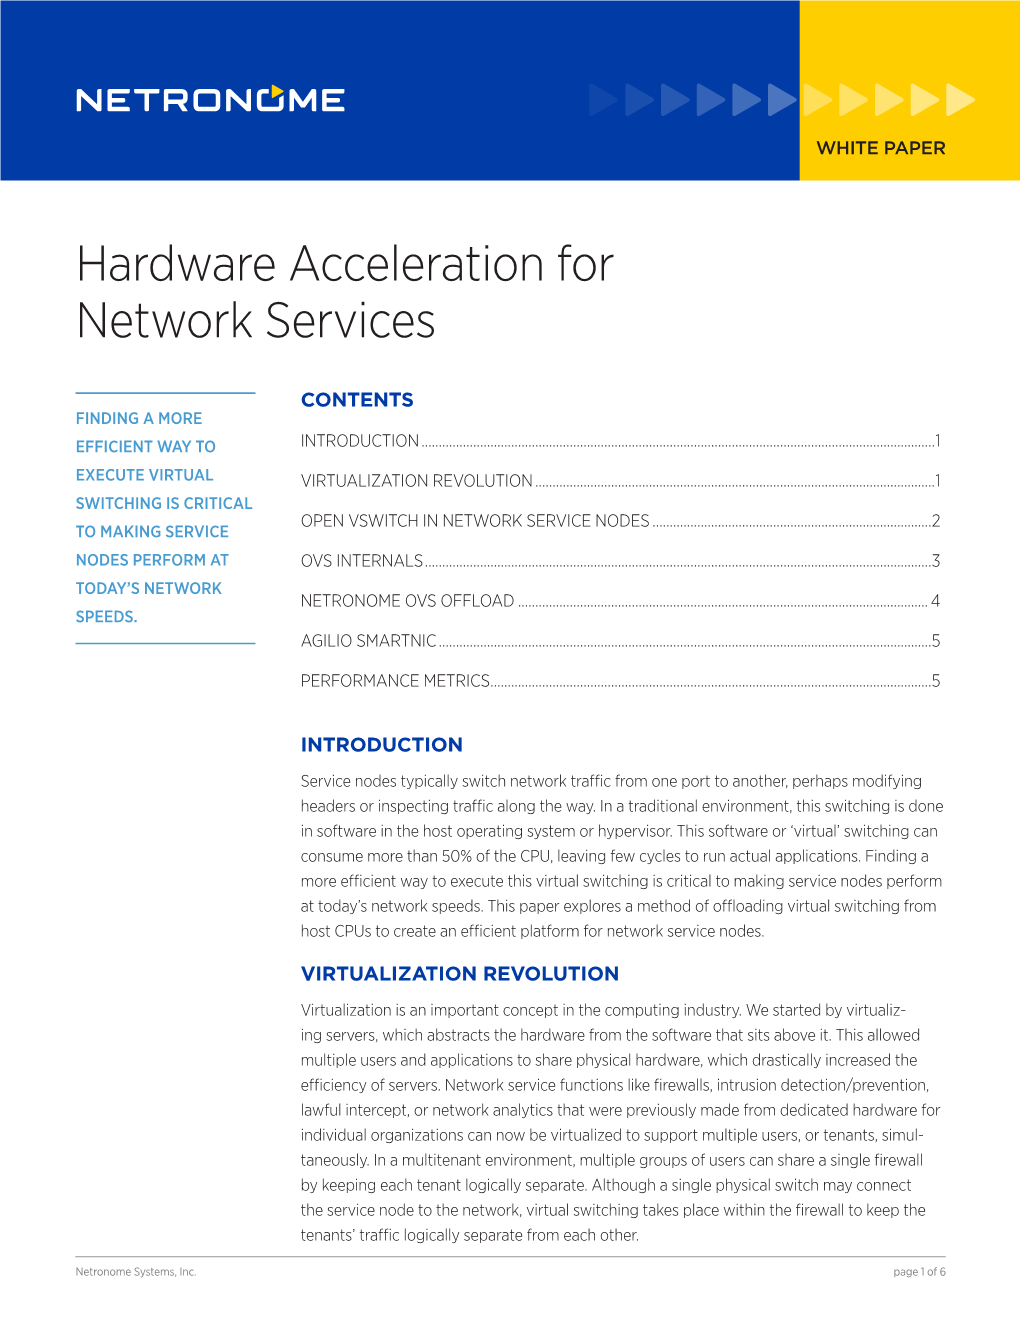 Hardware Acceleration for Network Services